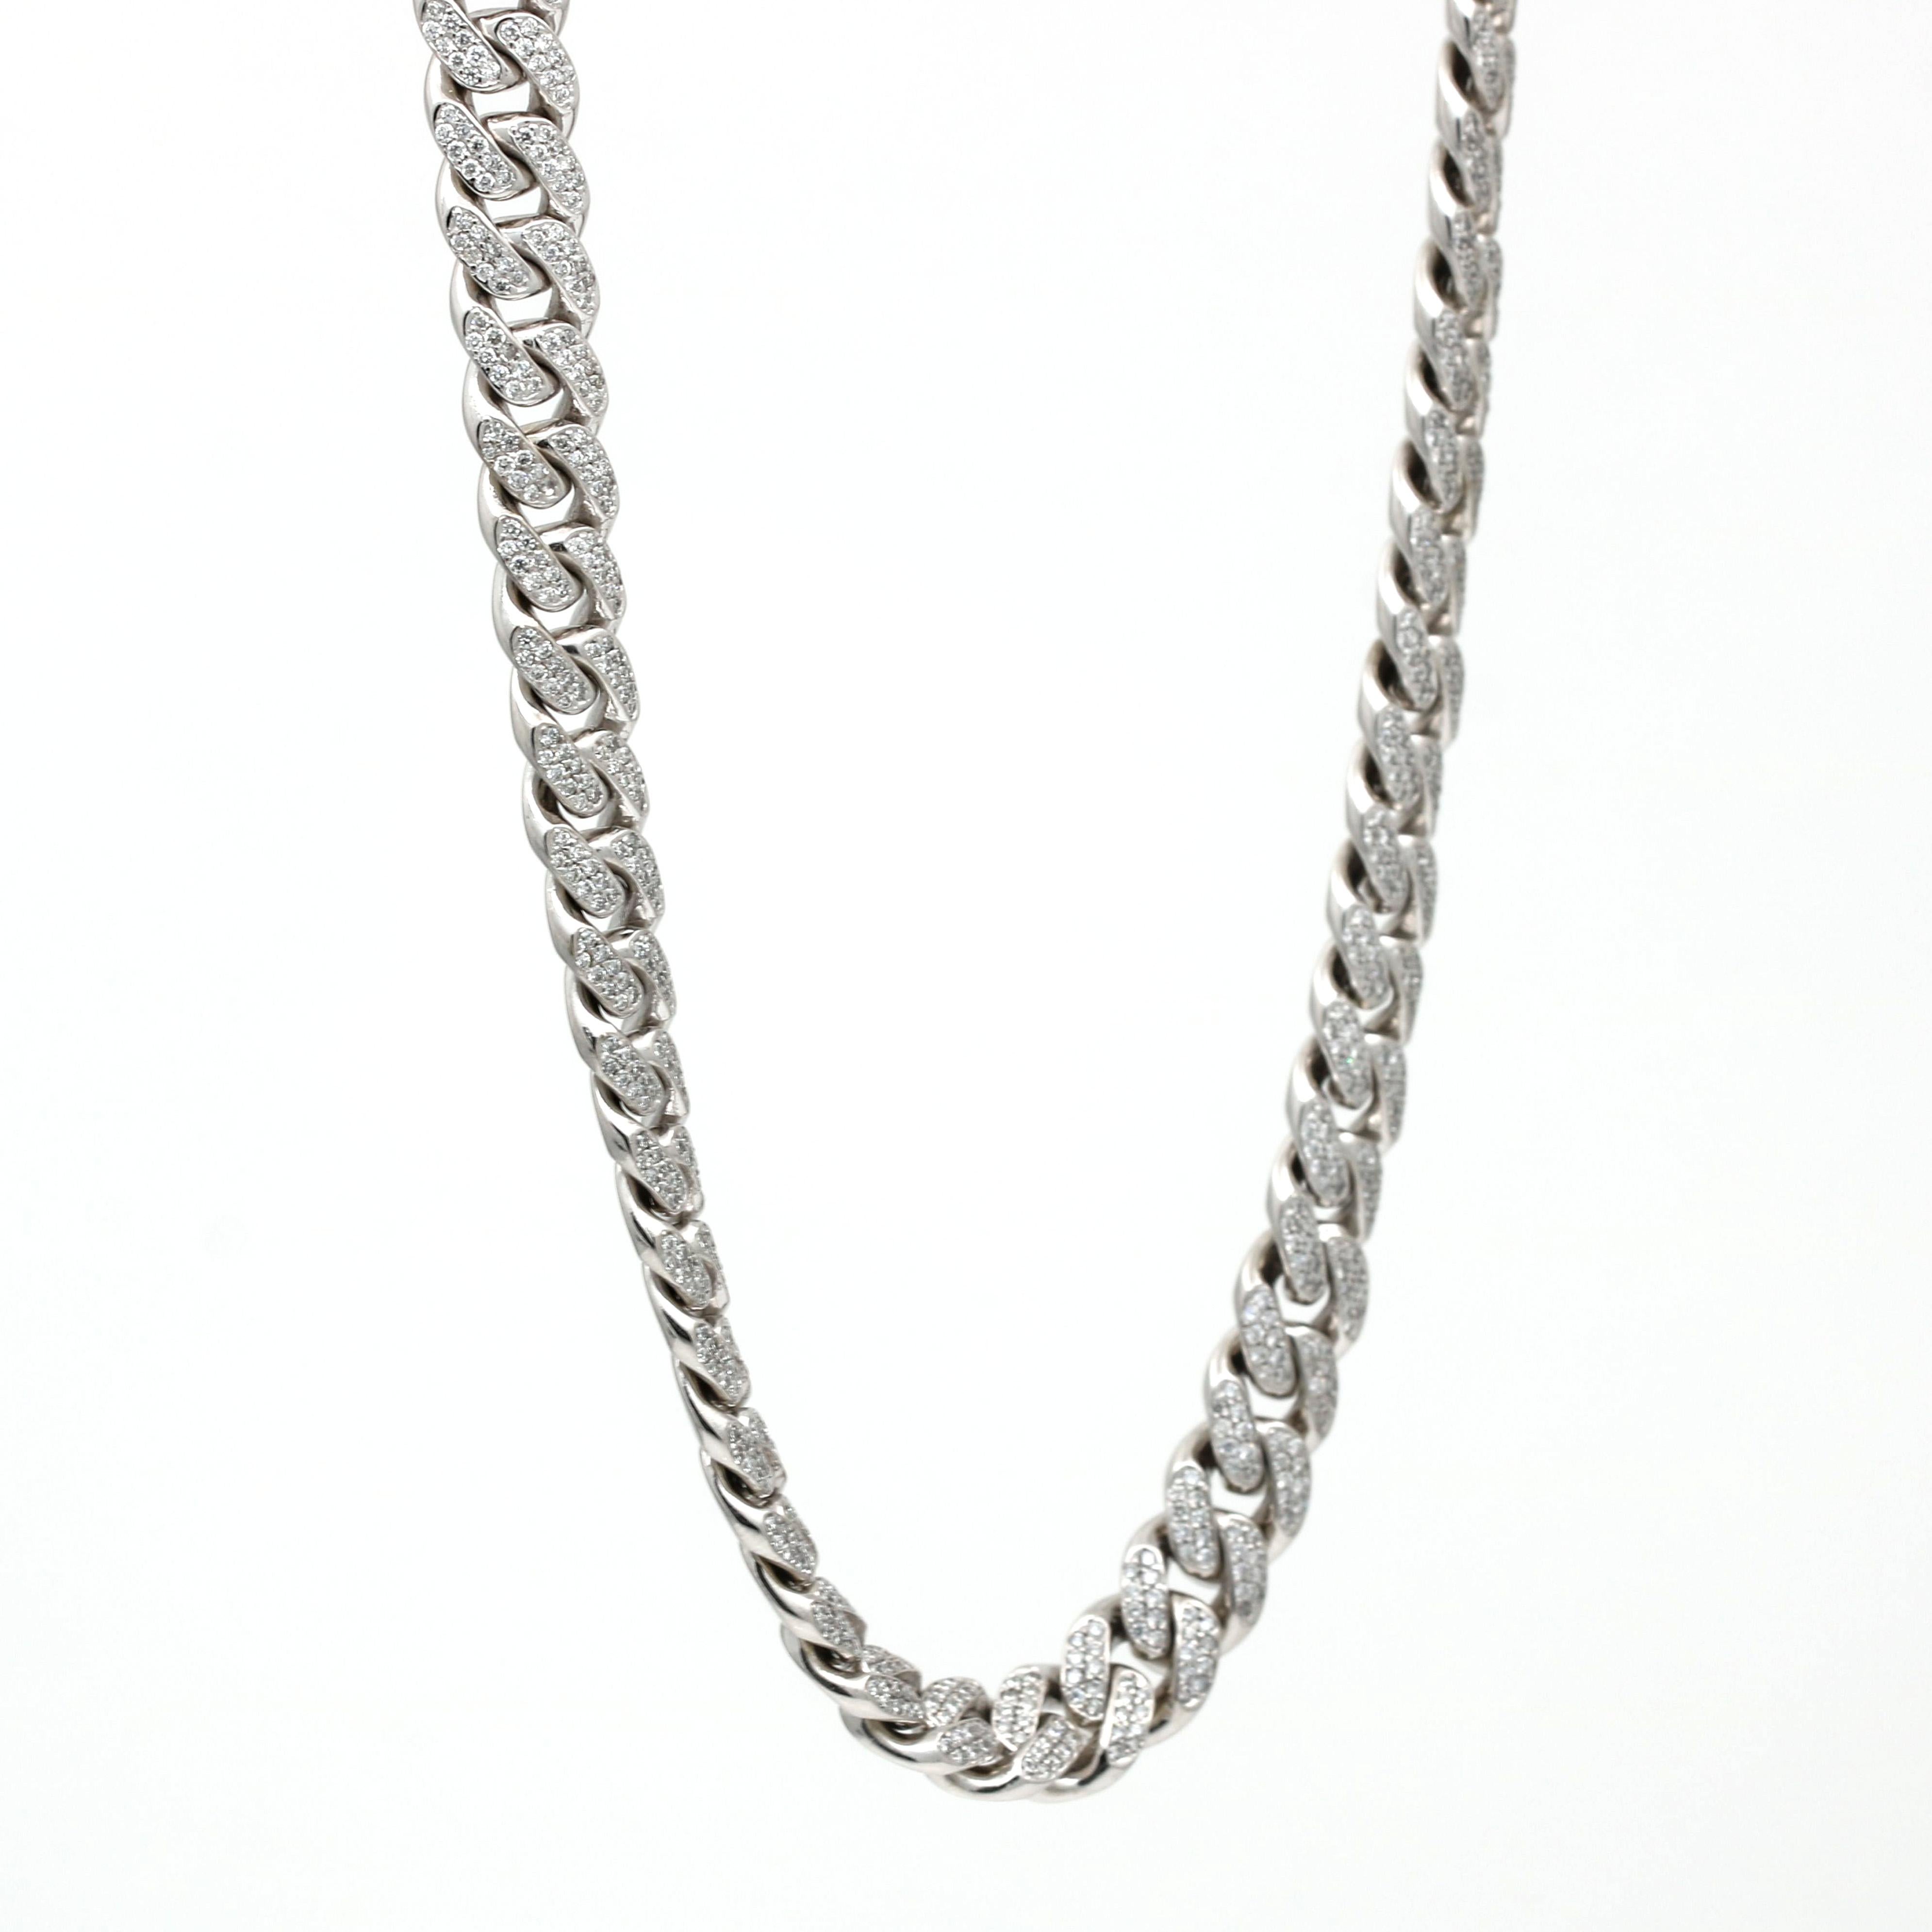 This 14k white gold chain features curb link pave-set brilliant round-cut diamonds in a high-quality, contemporary design that makes for an eye-catching look without compromising comfort. The chain is solid and durable, and easy to wear. The chain